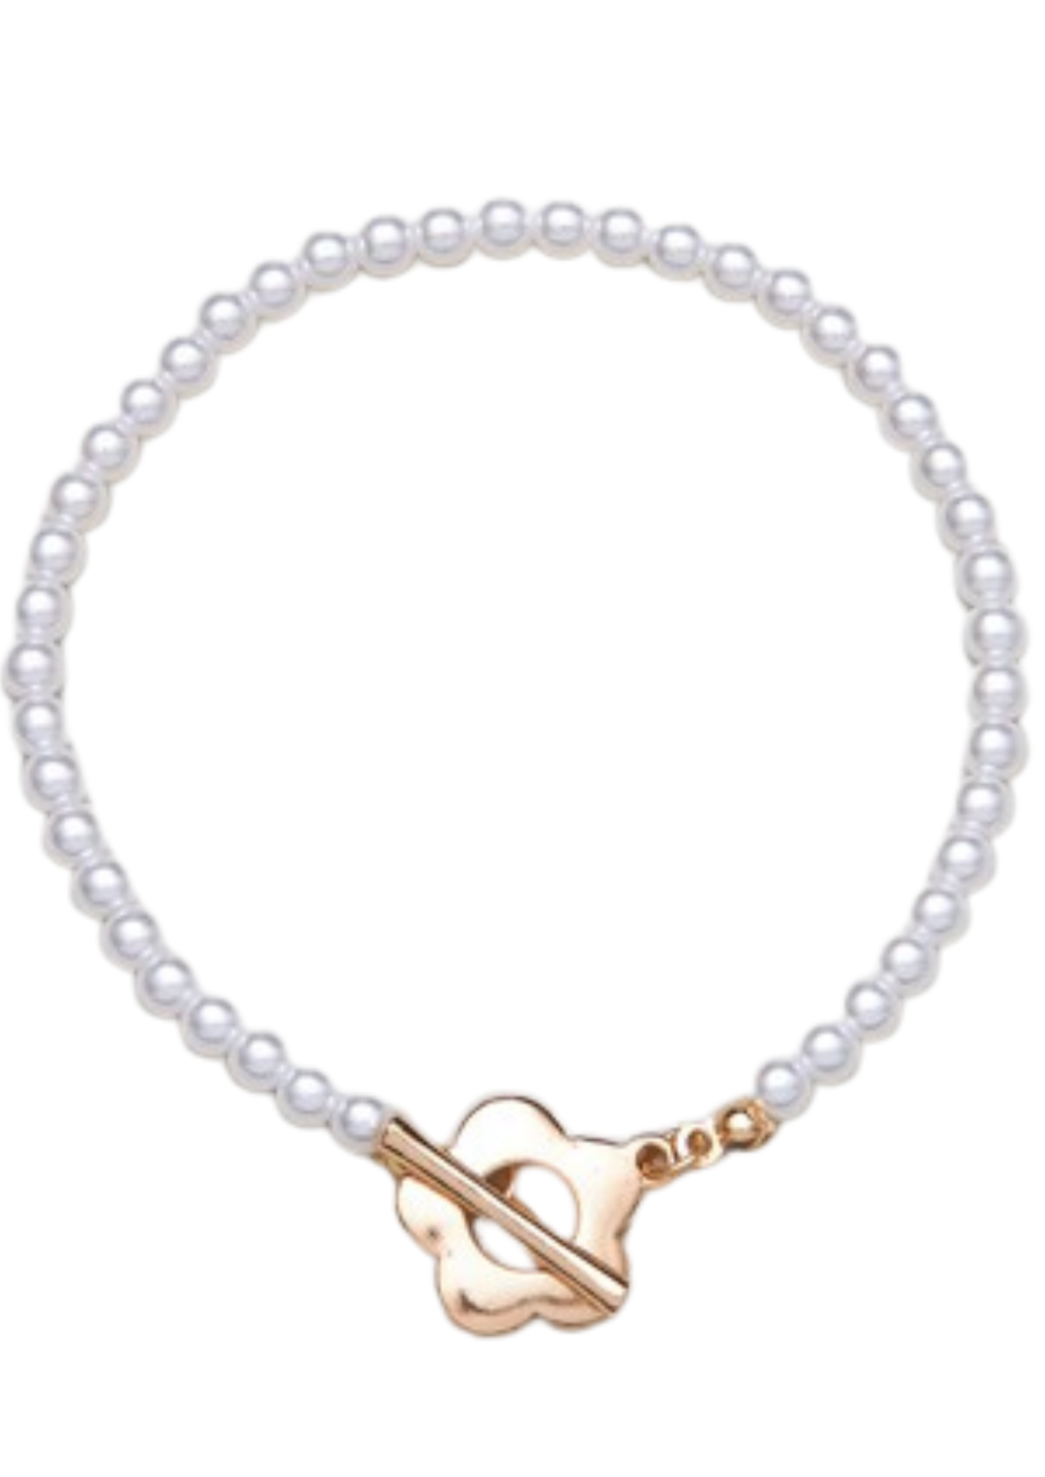 Pearl Bracelet with Floral Clasp in Gold